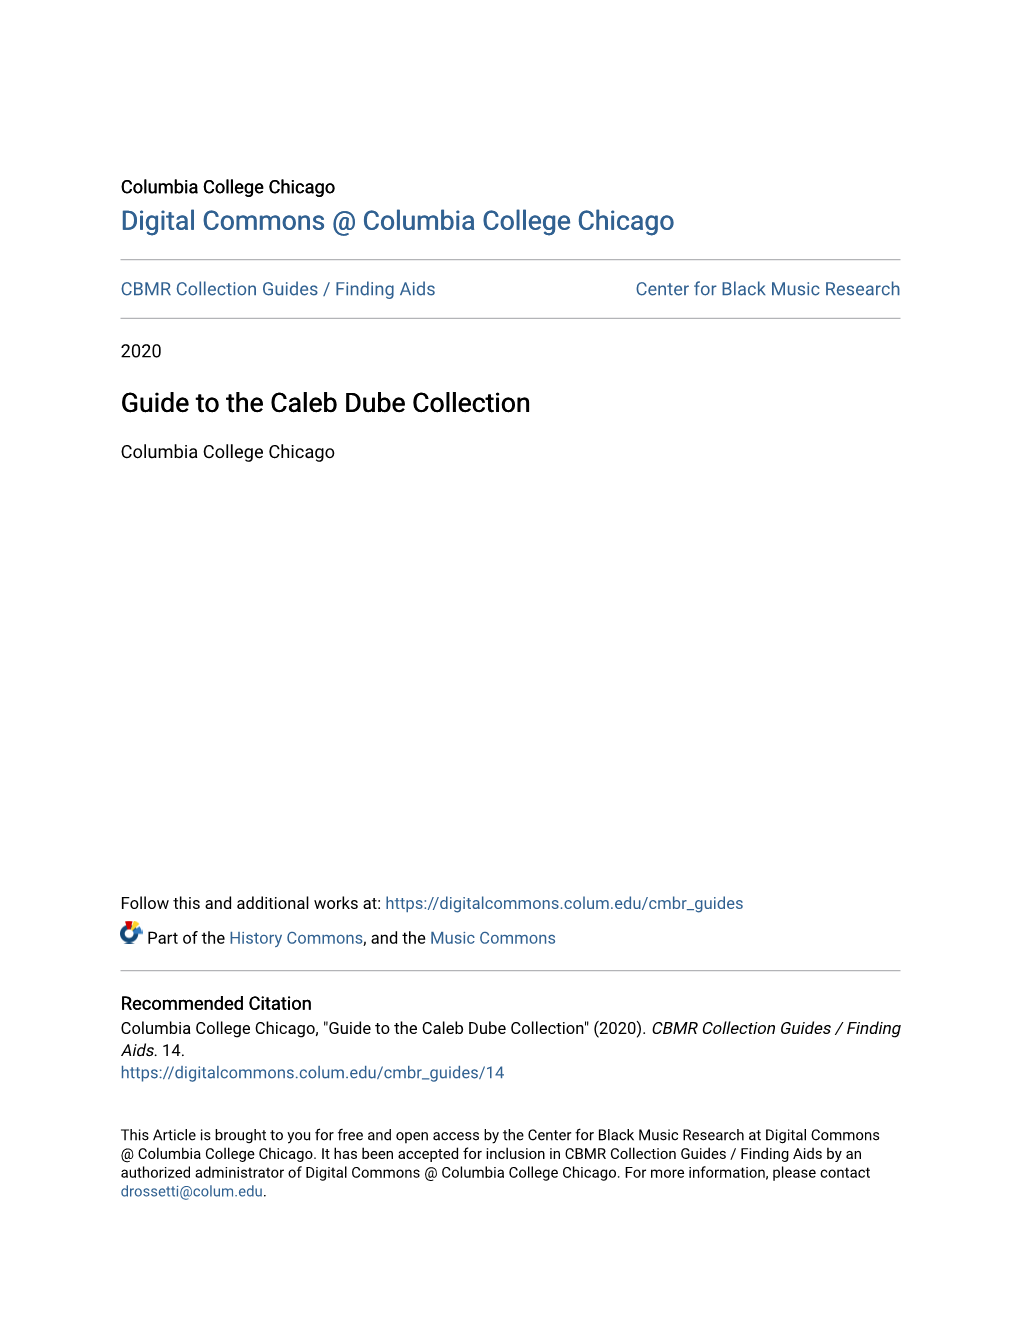 Guide to the Caleb Dube Collection